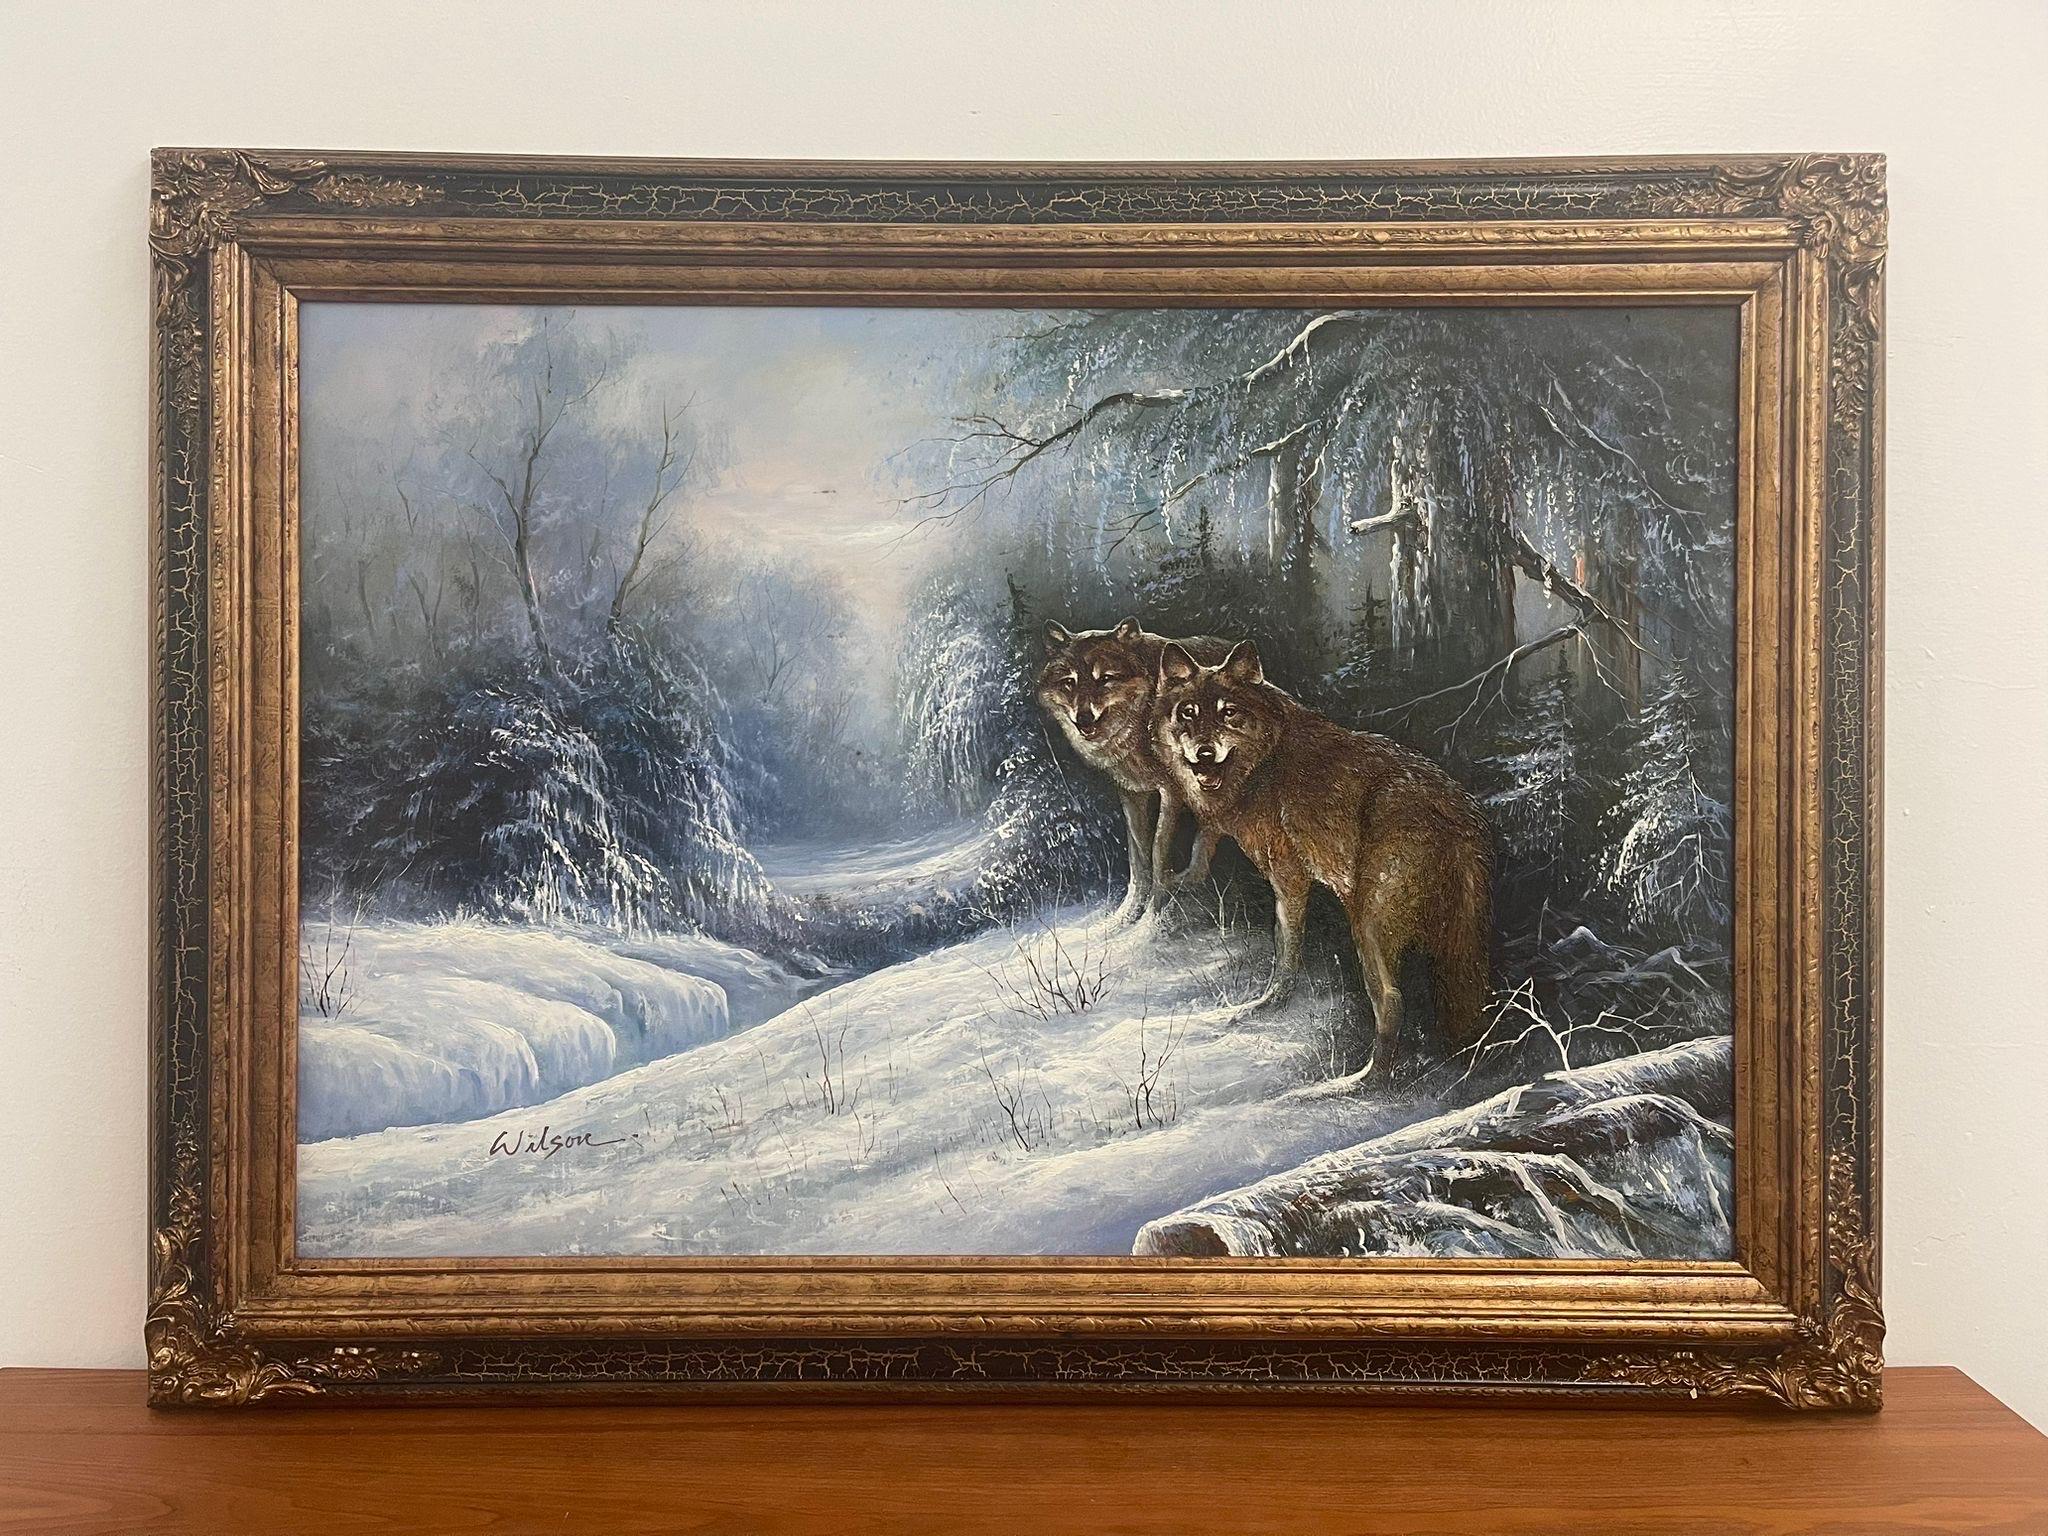 Vintage Painting on Canvas, Signed in the Lower Corner as Pictured. Textured Paint.,Particularly on the Wolves. Complimented Well with the Gold Toned Frame. Vintage Condition Consistent with Age as Pictured.

Dimensions. 44 W ; 1 D ; 31 H